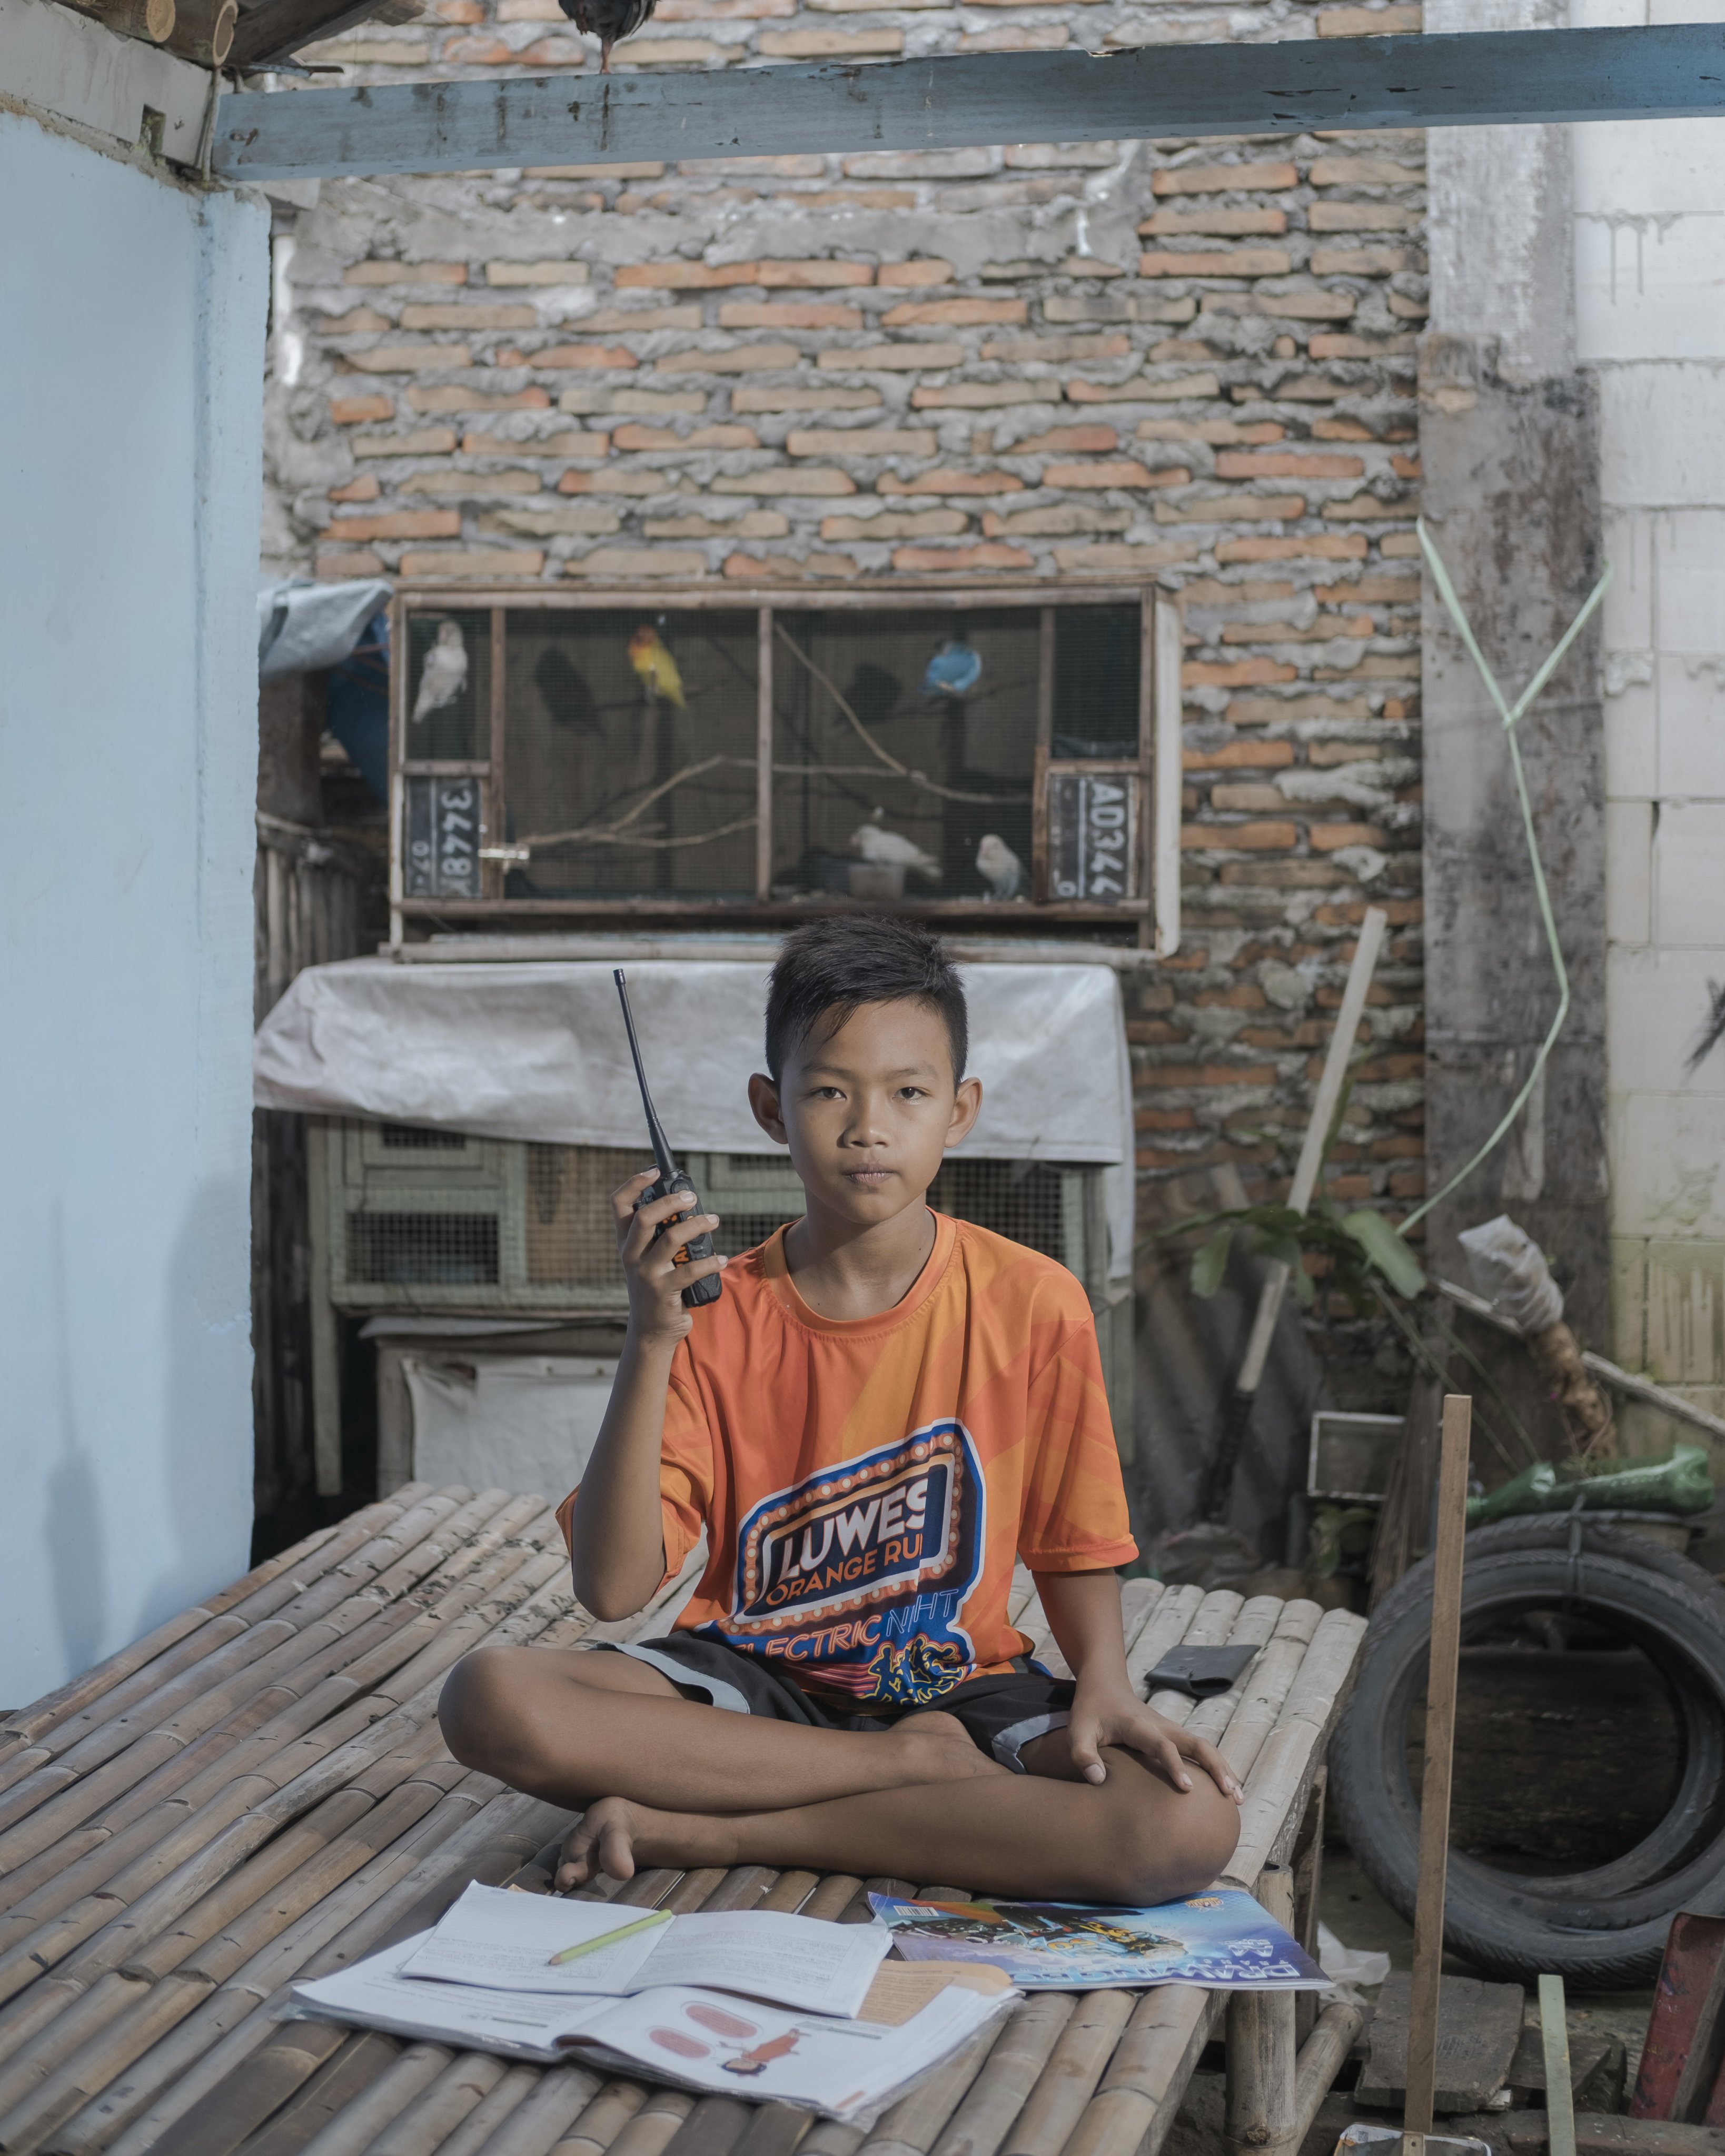 Fahri Yulianto, 11, listens to school lessons using a walkie-talkie in Surakarta, Indonesia. “At first, my teacher announced that we would study at home for two weeks, not expecting that it would be extended to more than a year until now. I’m looking forward to school reopening soon,” he says. Photo: Agoes Rudianto